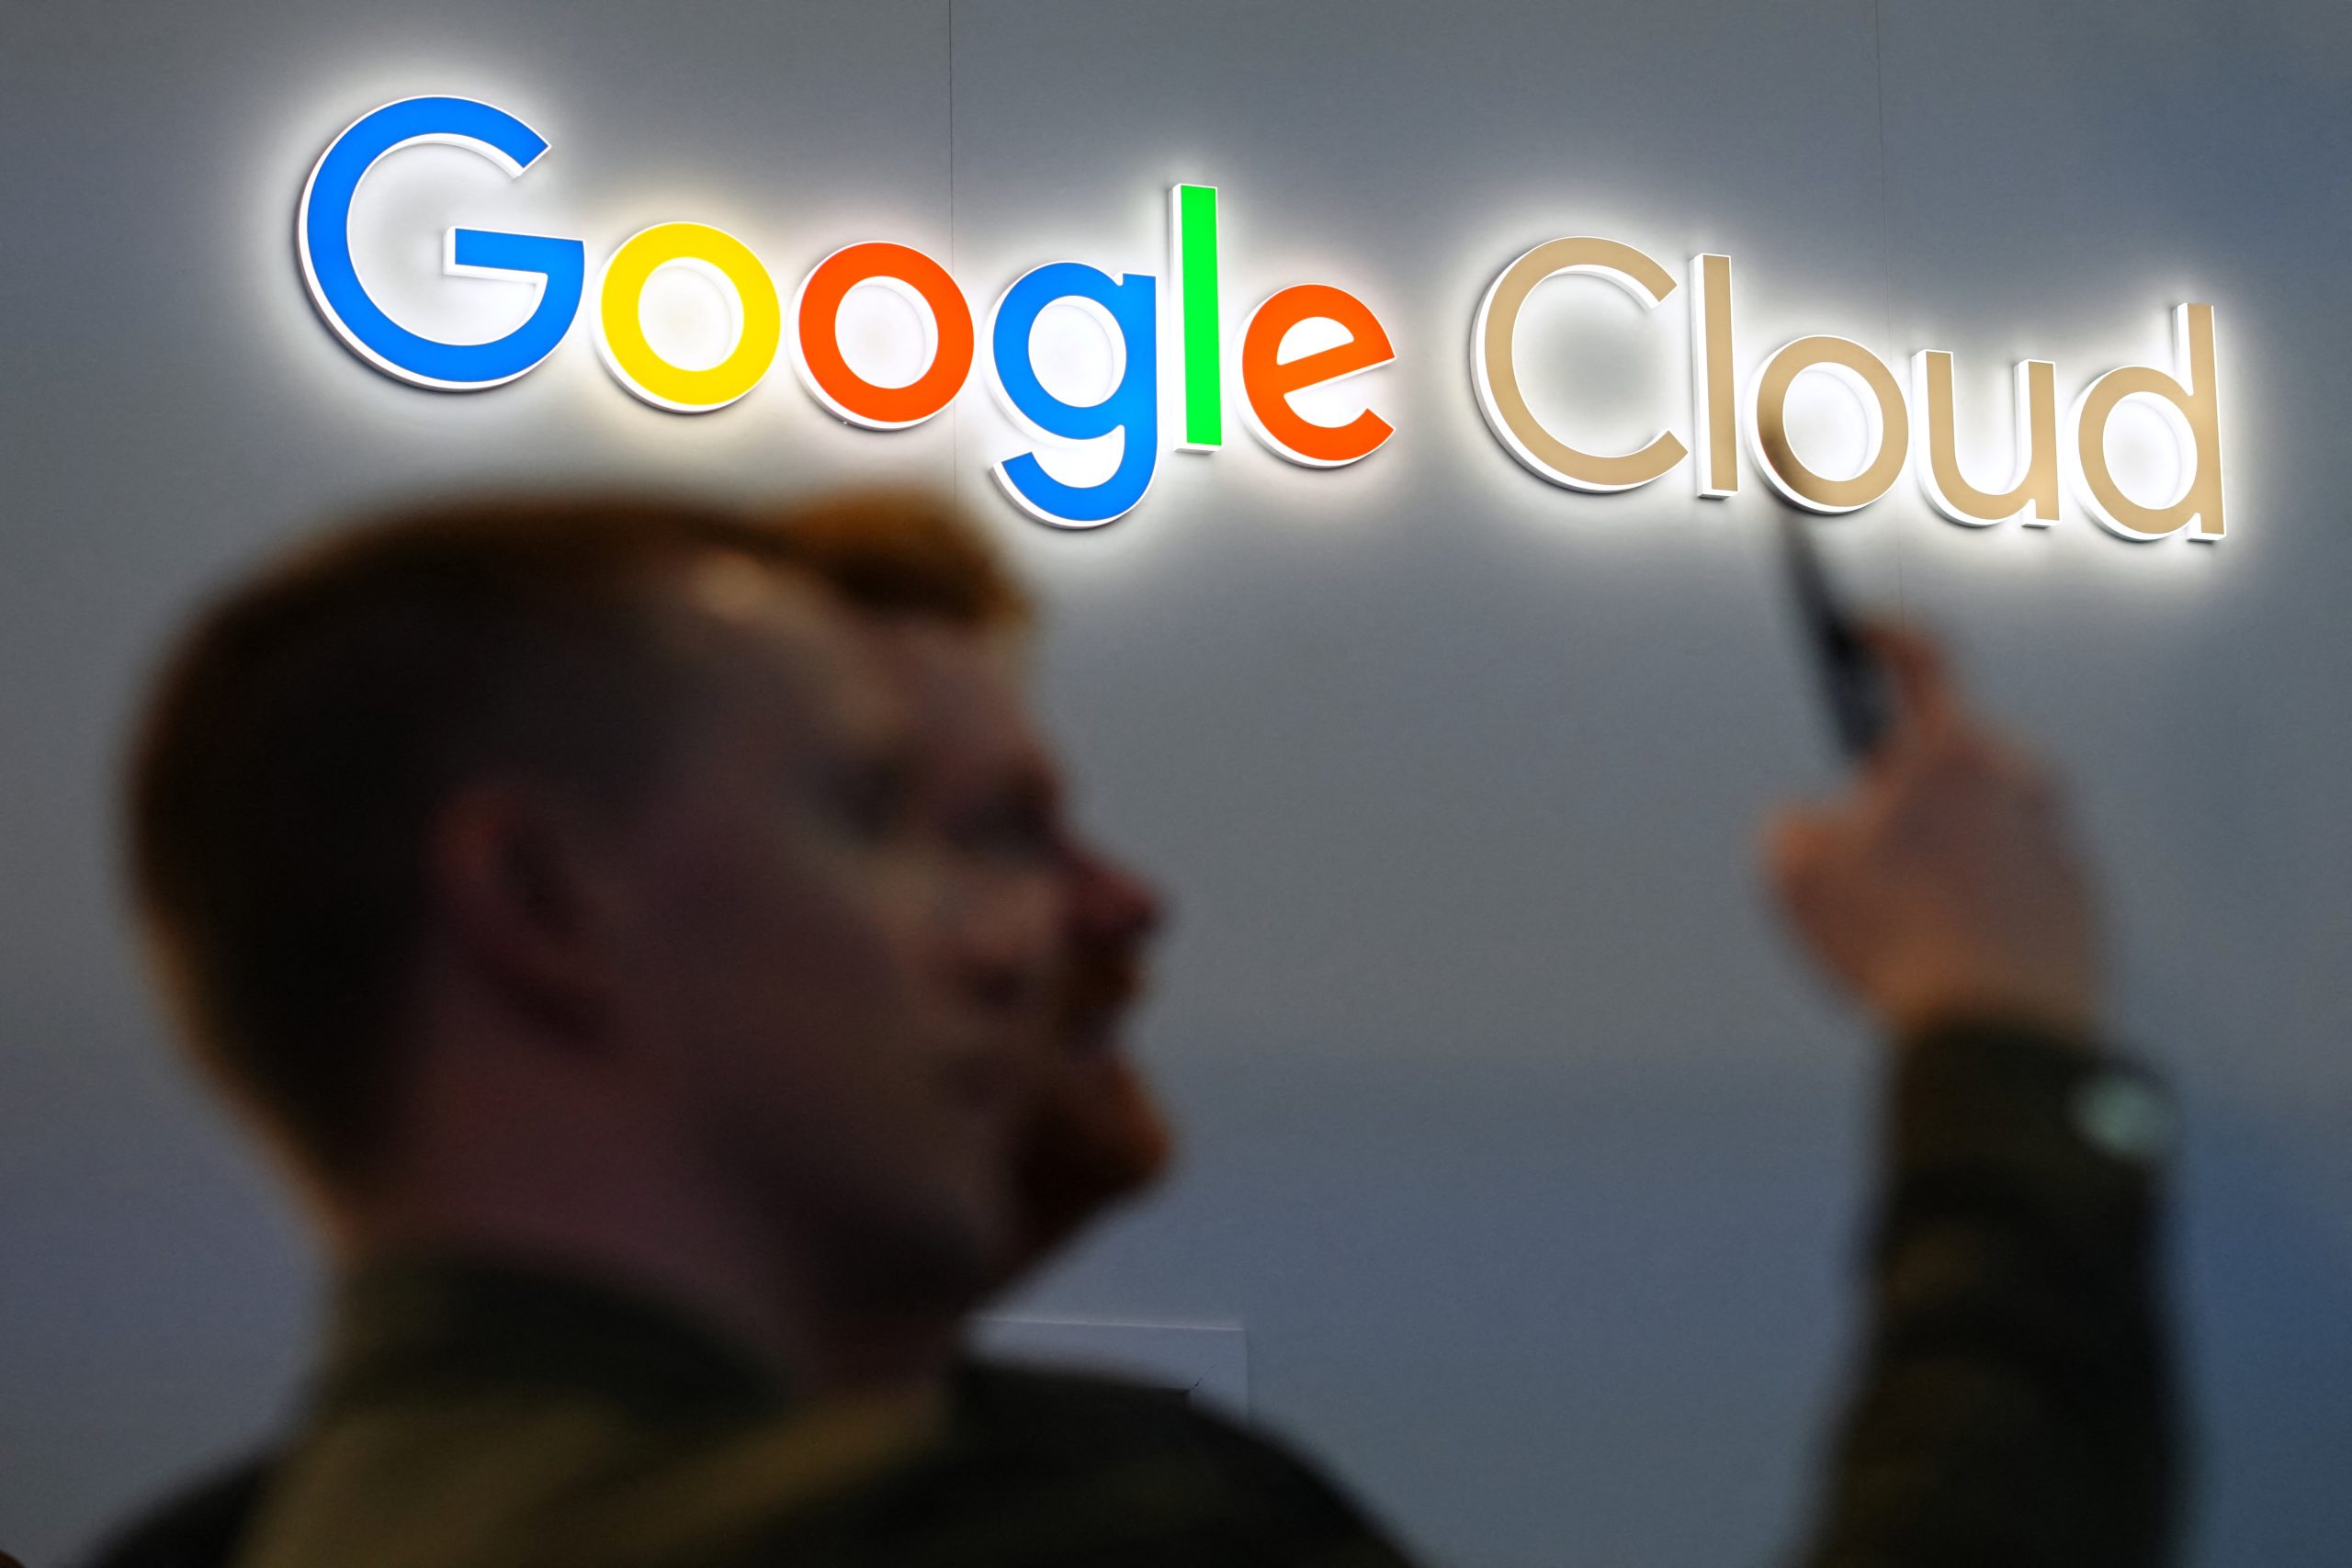 Google Cloud's logo is pictured at the Mobile World Congress (MWC), the telecom industry's biggest annual gathering. (Photo by PAU BARRENA/AFP via Getty Images)